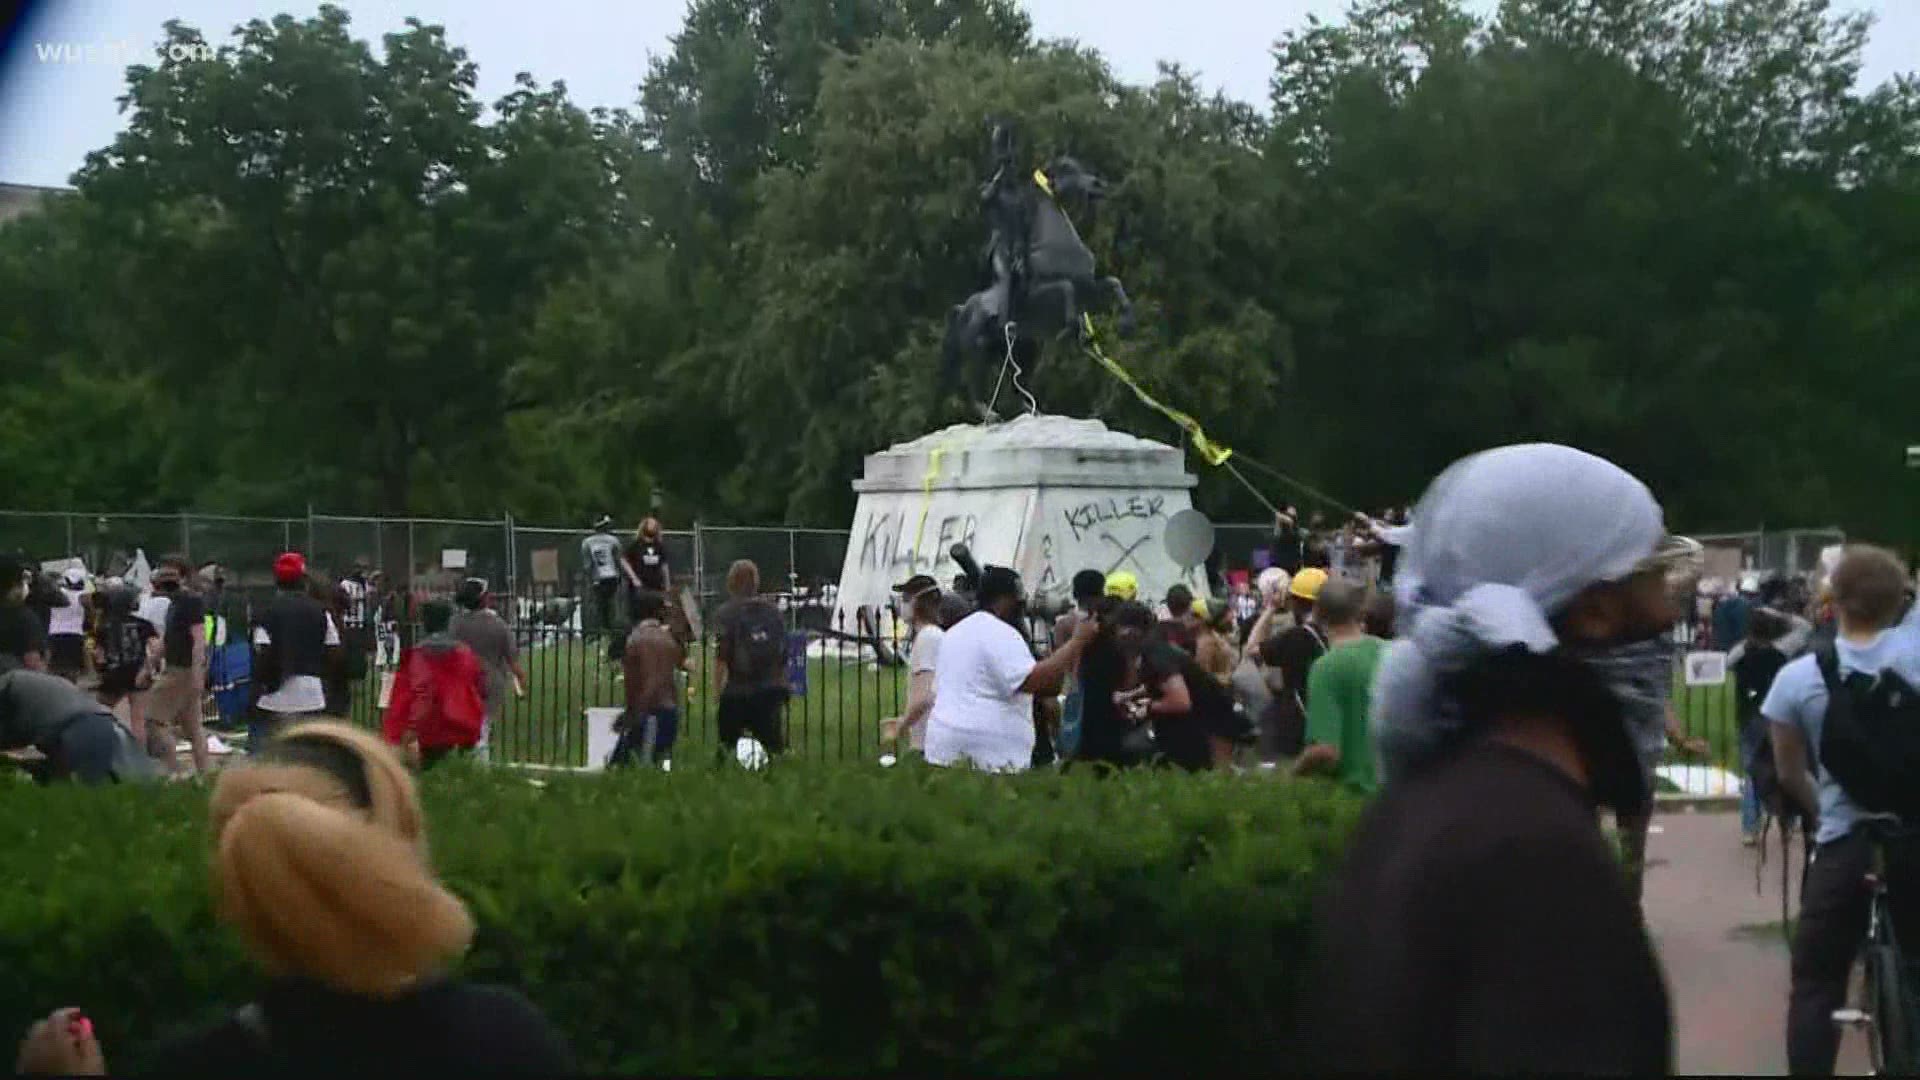 A federal judge on Monday released a George Washington University student from jail after last week's alleged attempt to tear down the statue of Andrew Jackson.